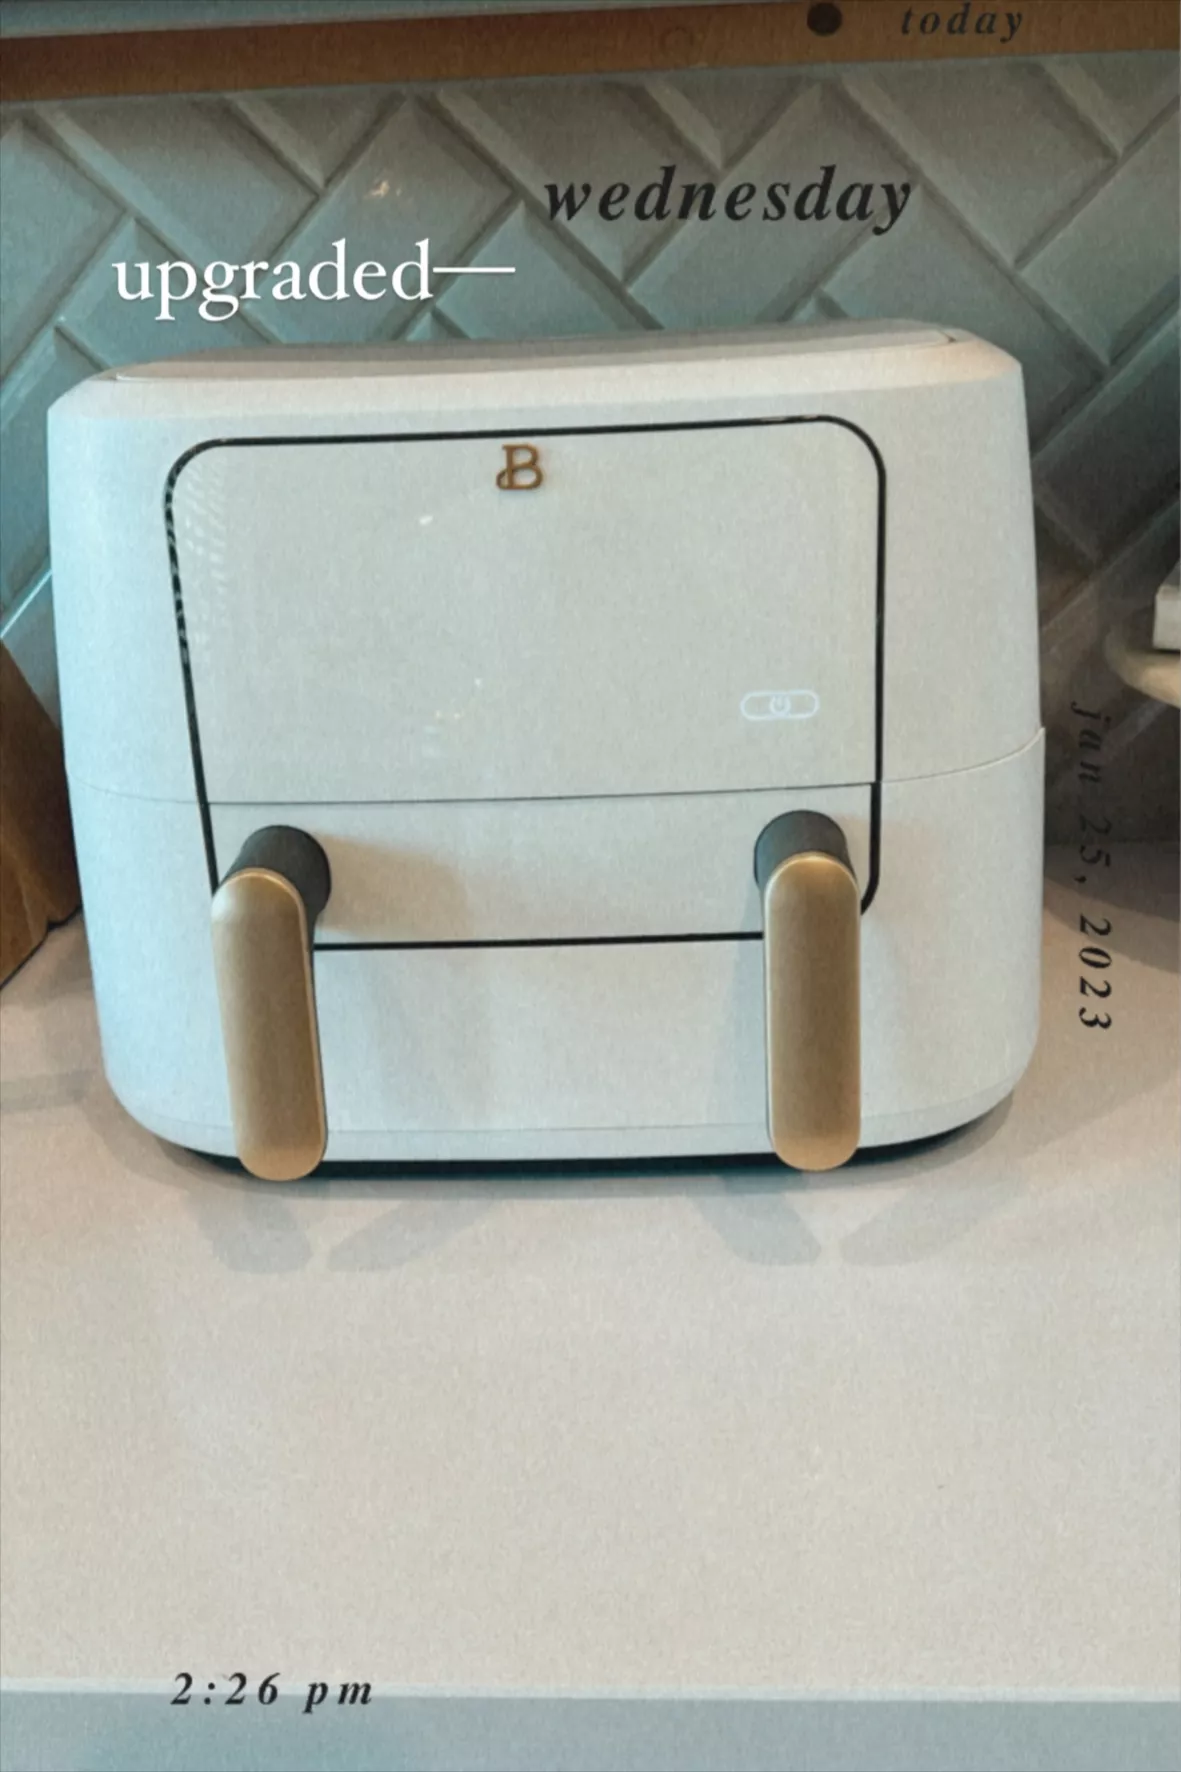 Beautiful 9QT TriZone Air Fryer, White Icing by Drew Barrymore